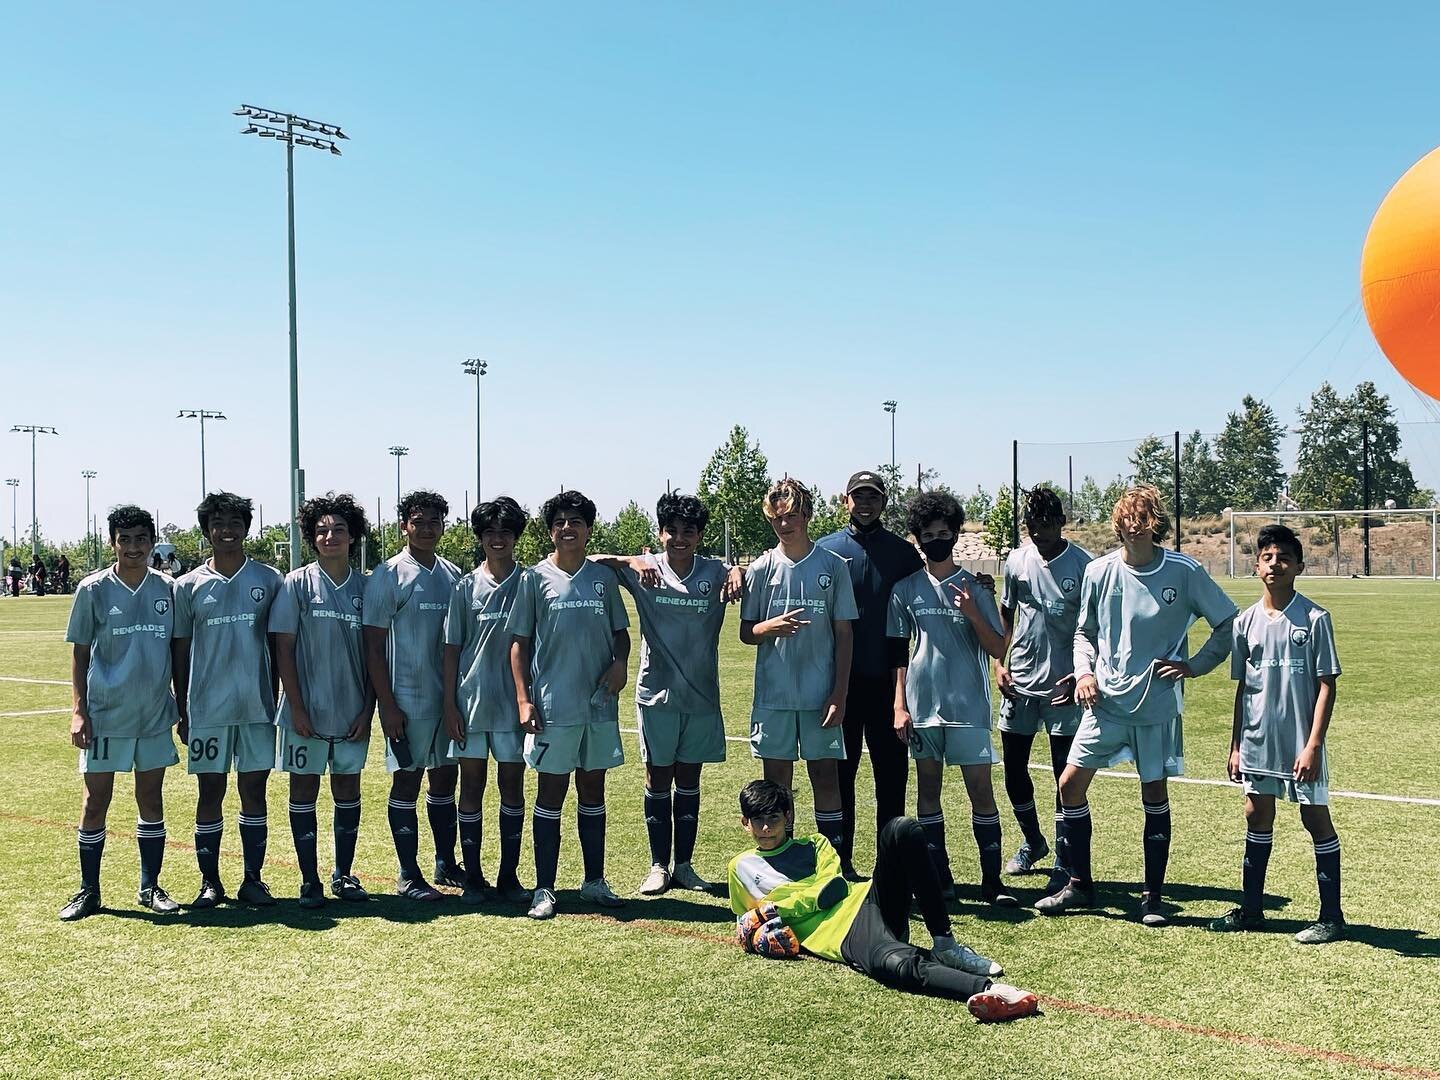 &ldquo;Good, Better, Best. Never let it rest. Until your Good is Better, and your Better is your Best.&rdquo; -TD // OFF ⚽️ to State Cup this weekend &bull; GOOD LUCK boys 🤙🏼📸 cred: RFC B2005 #RENEGADESFC #RFCPROUD